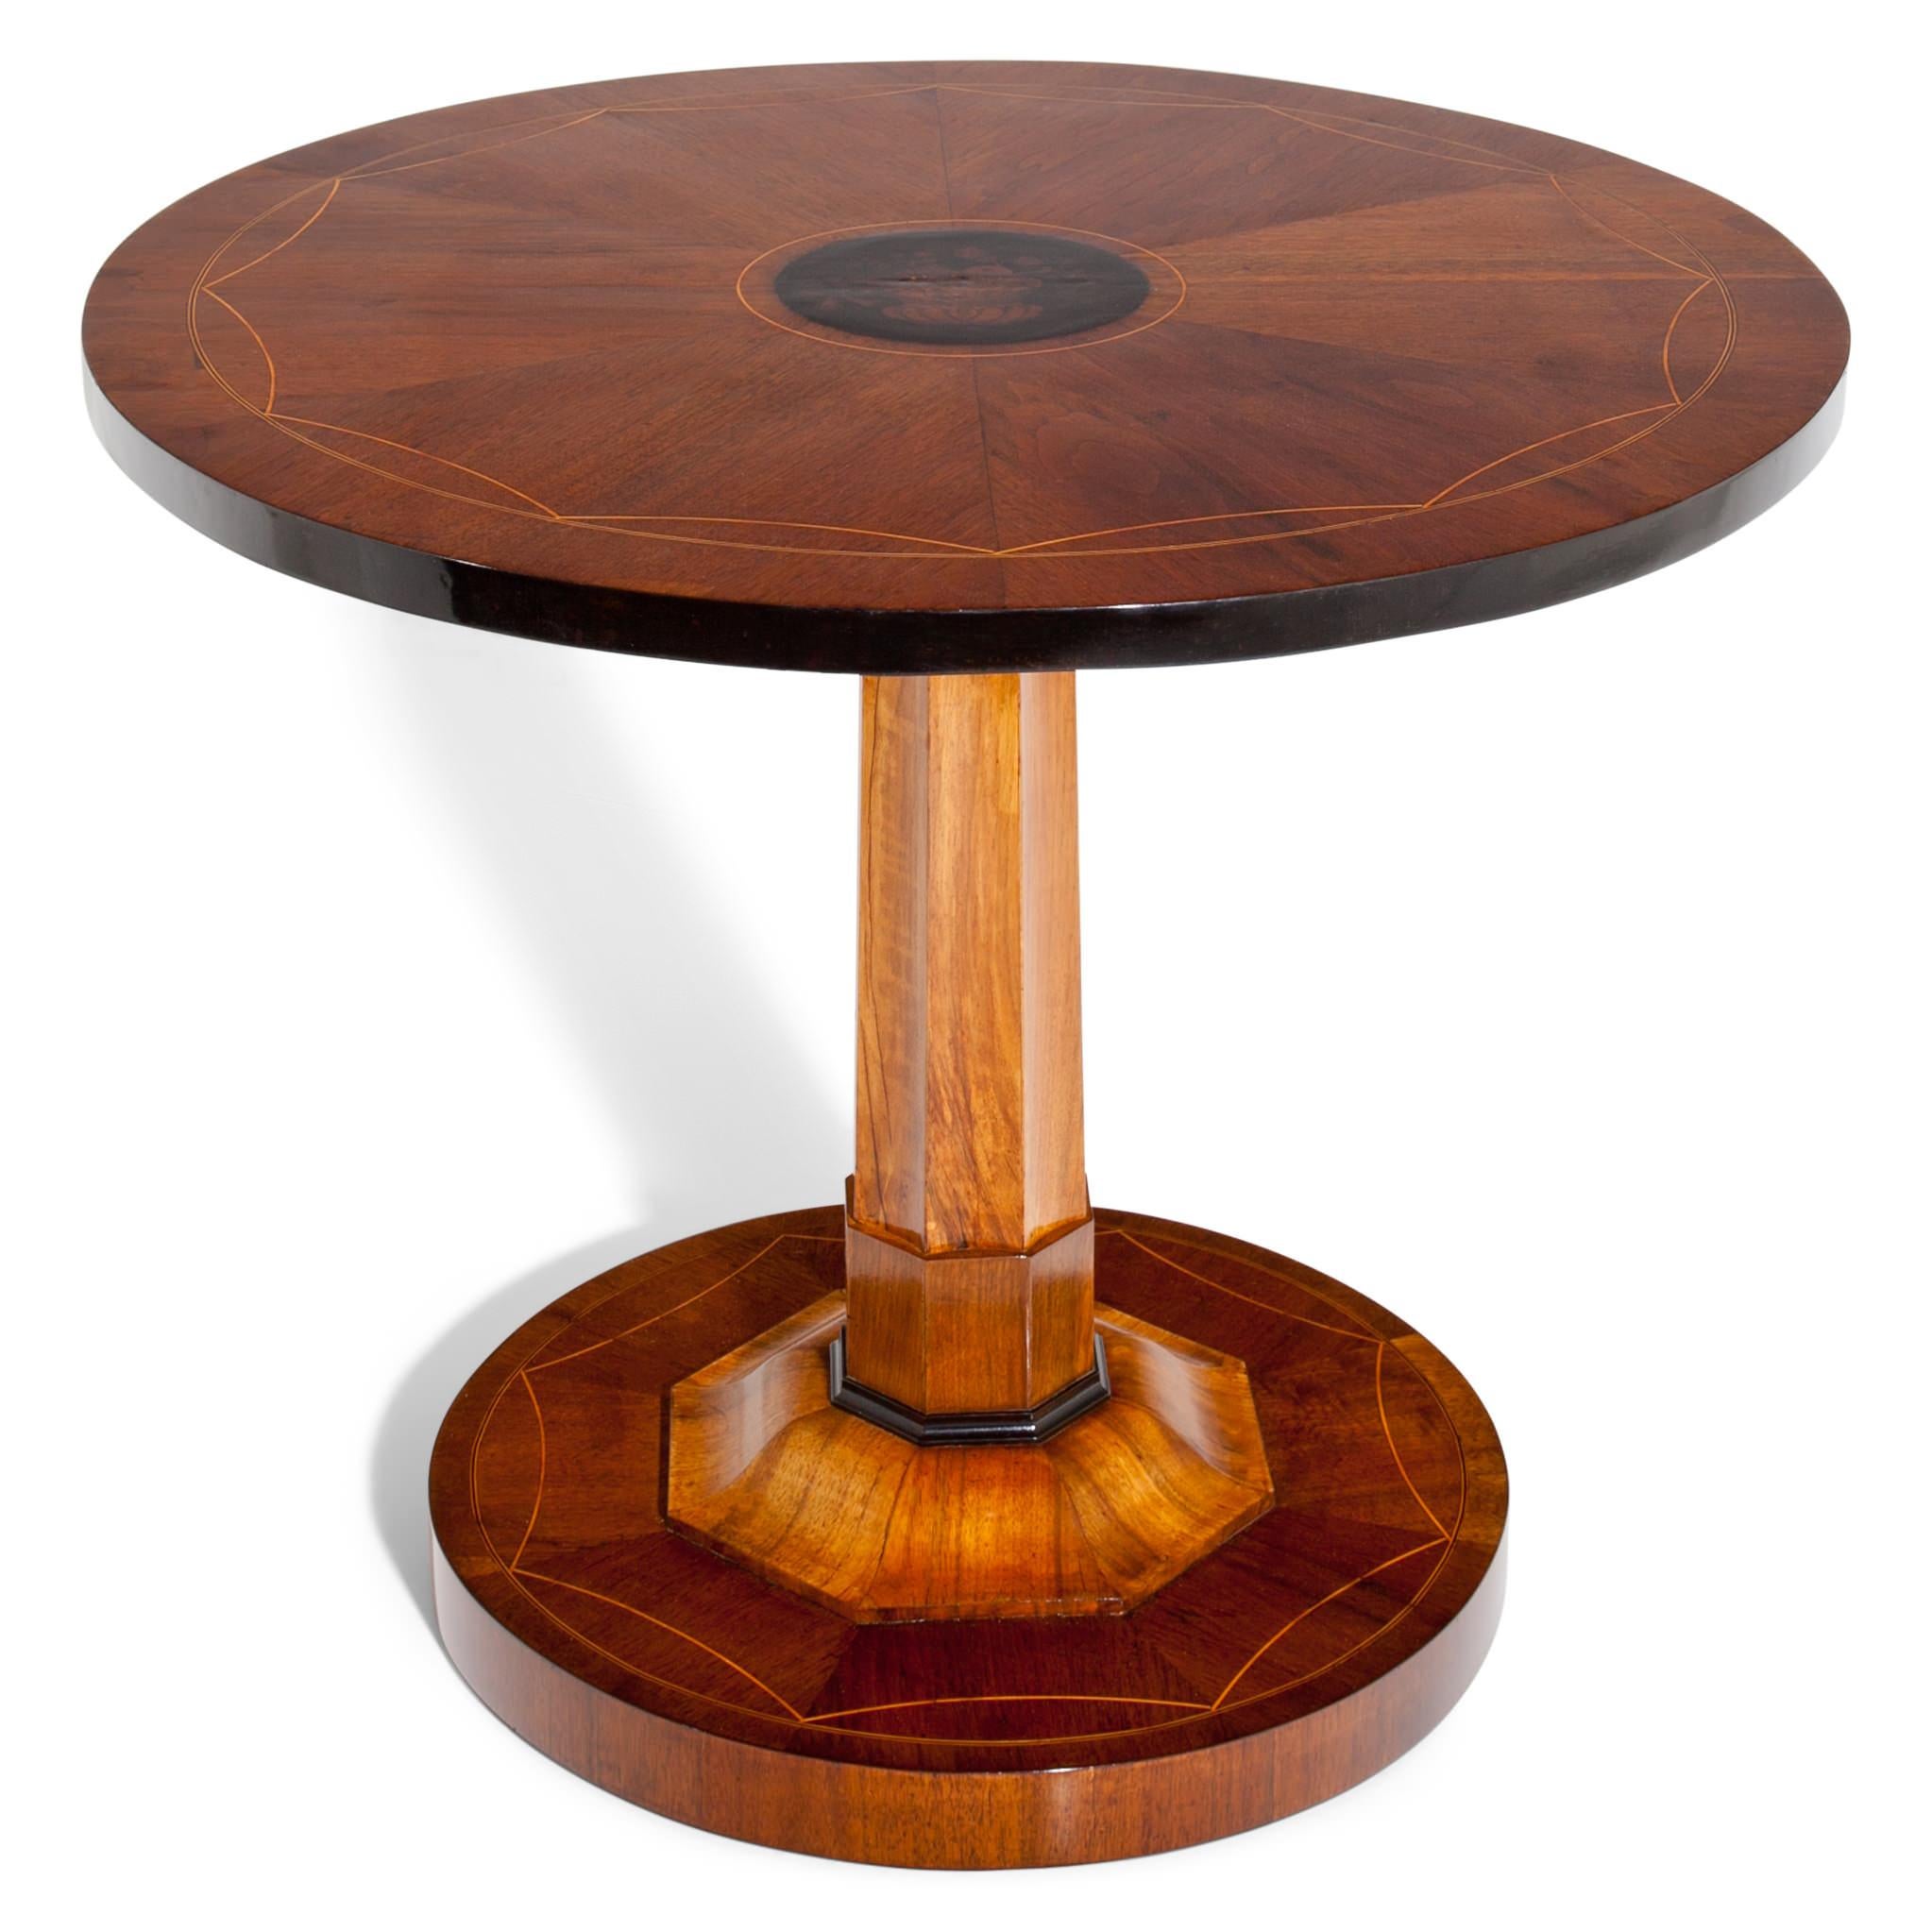 Empire salon table on a round base with an octagonal column and a round tabletop. The base and top are decorated with Fine thread inlays. The tabletop shows an Amphora with flowers, painted in ink. The tabletop folds down. The table is in a